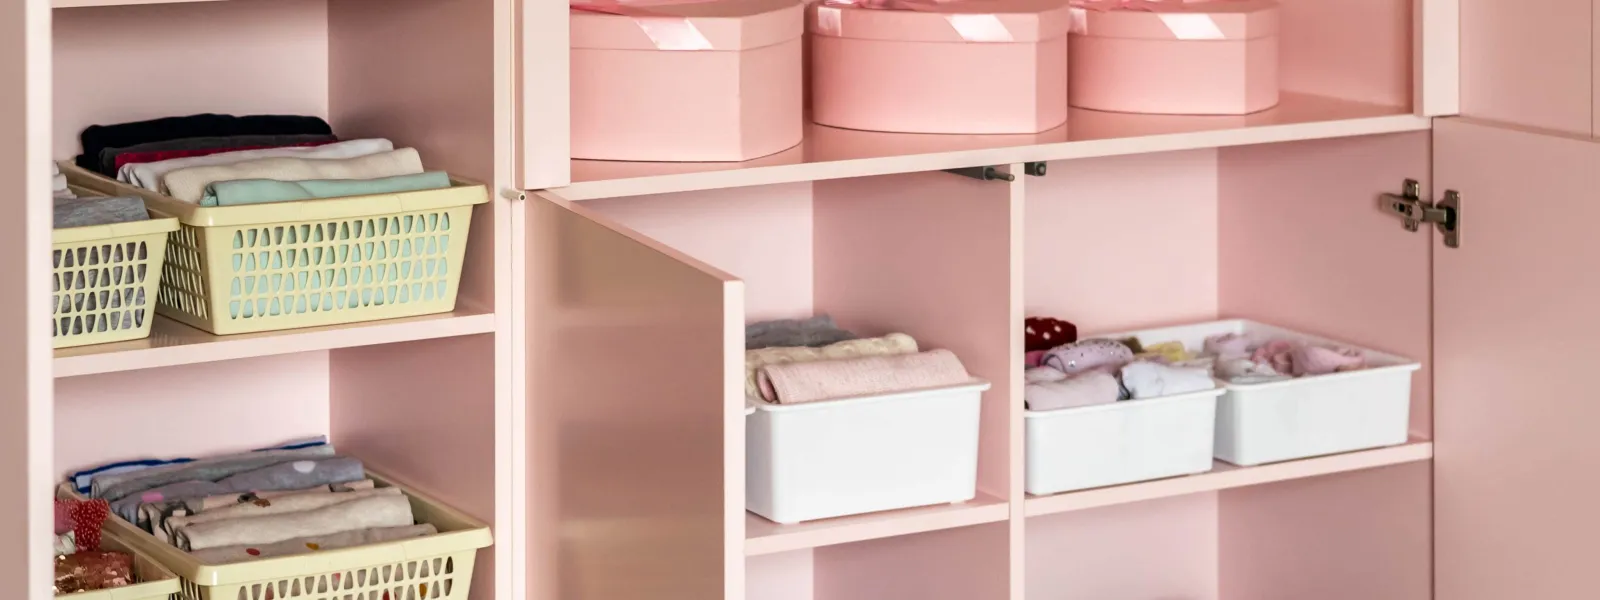 a pink closet for a child's room